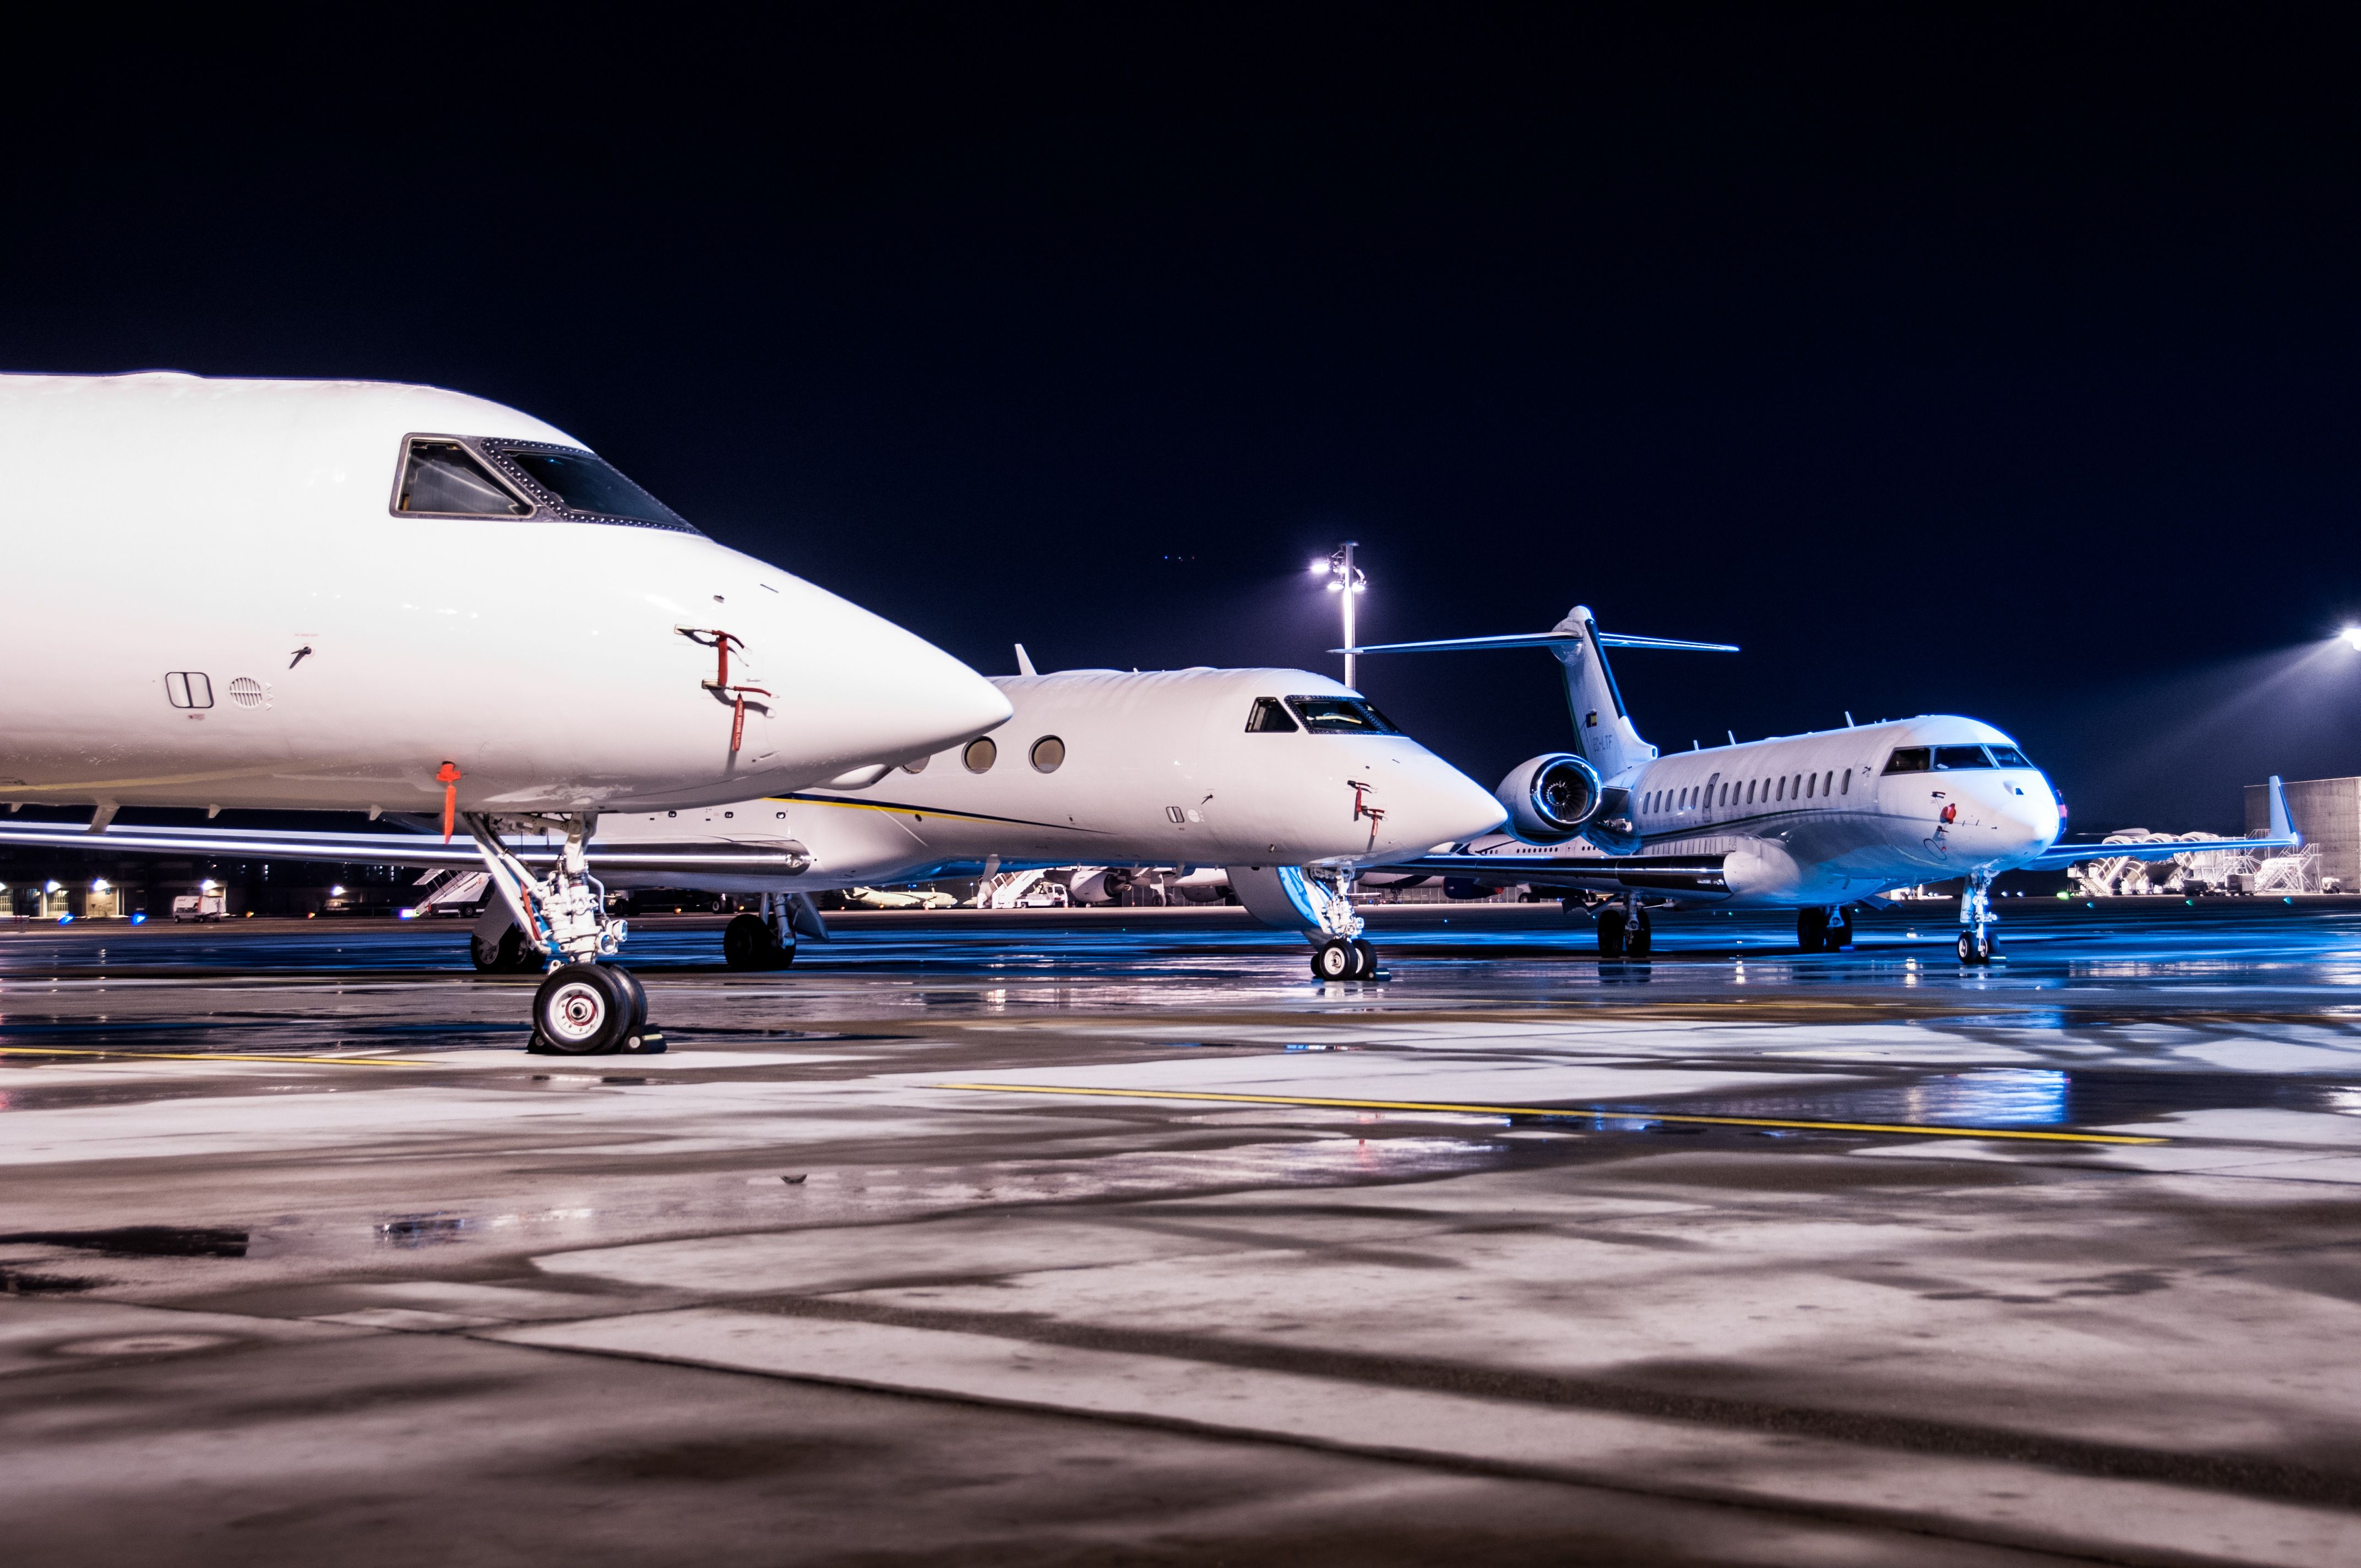 Several Private jets parked on an airport apron.